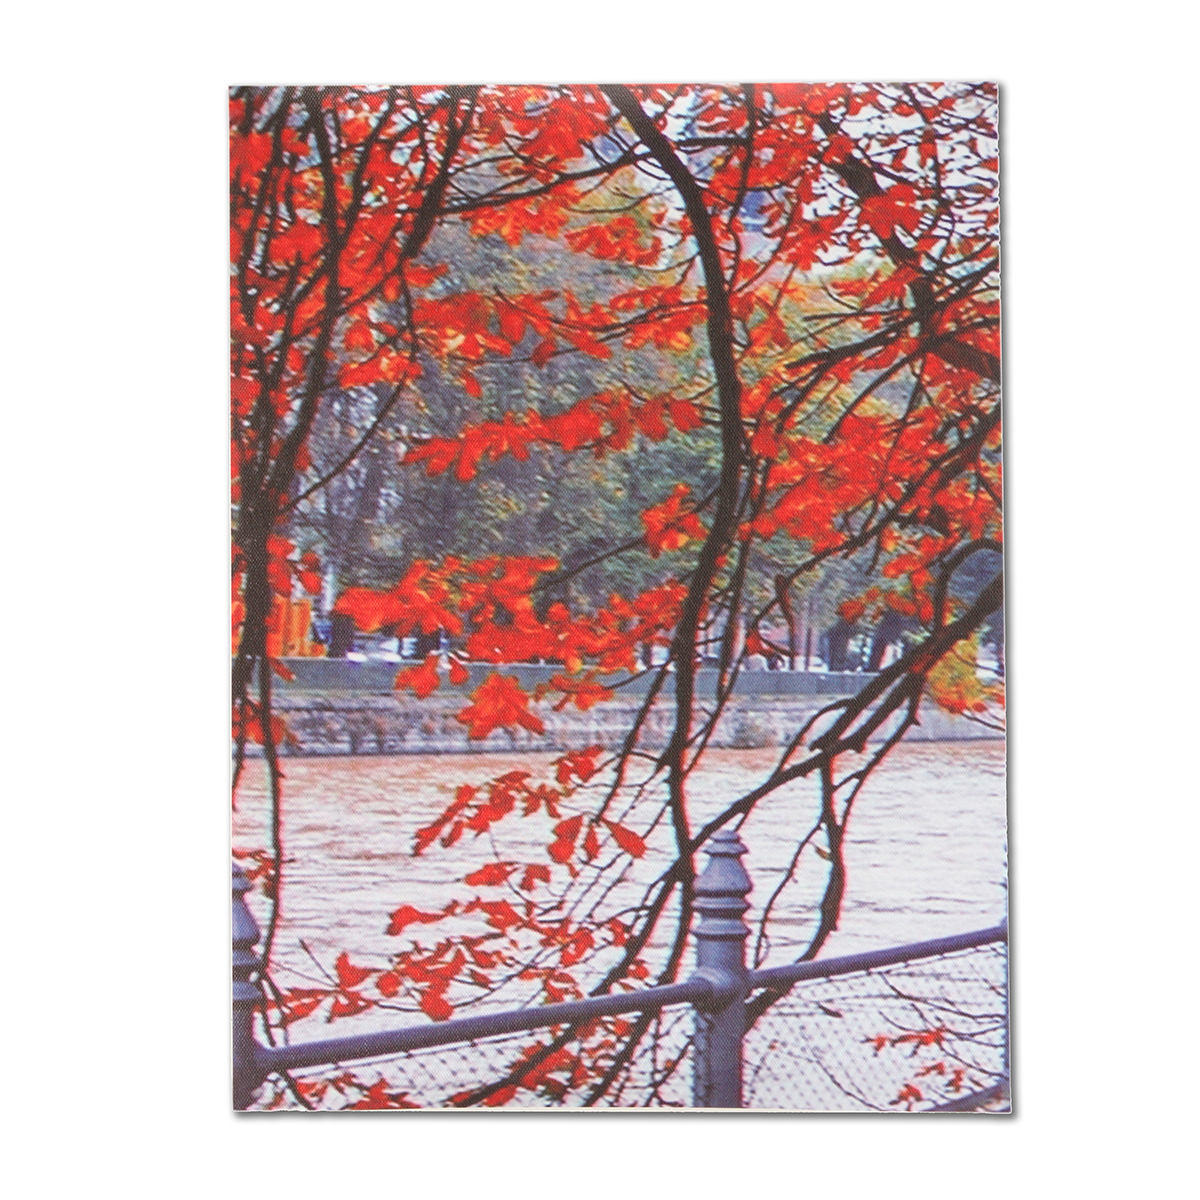 5Pcs-Red-Falling-Leaves-Canvas-Painting-Autumn-Tree-Wall-Decorative-Print-Art-Pictures-Unframed-Wall-1809936-7